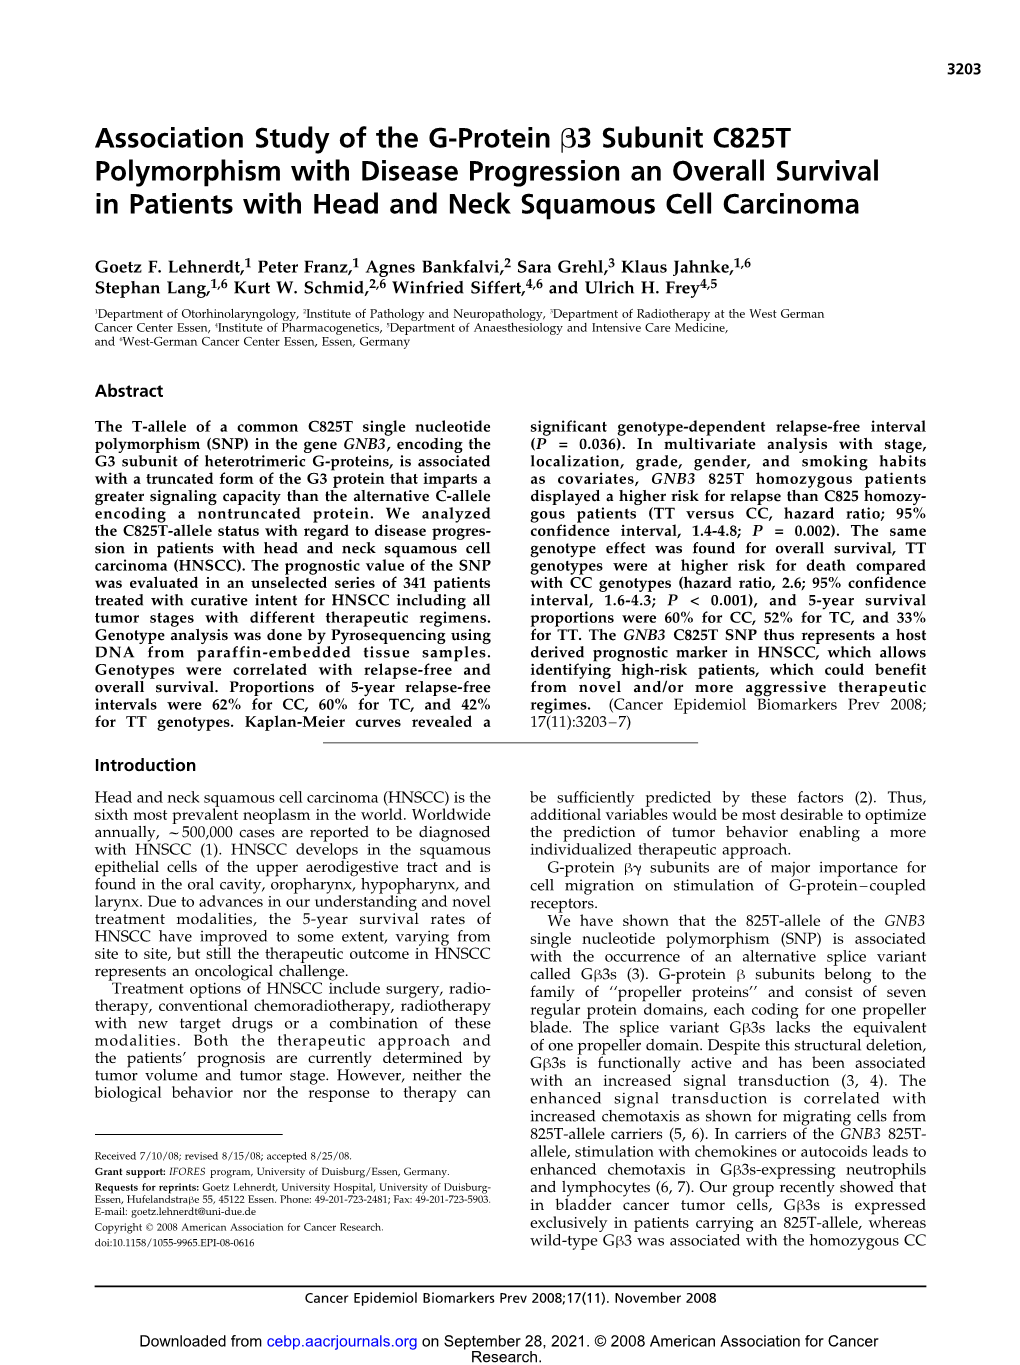 Association Study of the G-Protein B3 Subunit C825T Polymorphism with Disease Progression an Overall Survival in Patients with Head and Neck Squamous Cell Carcinoma